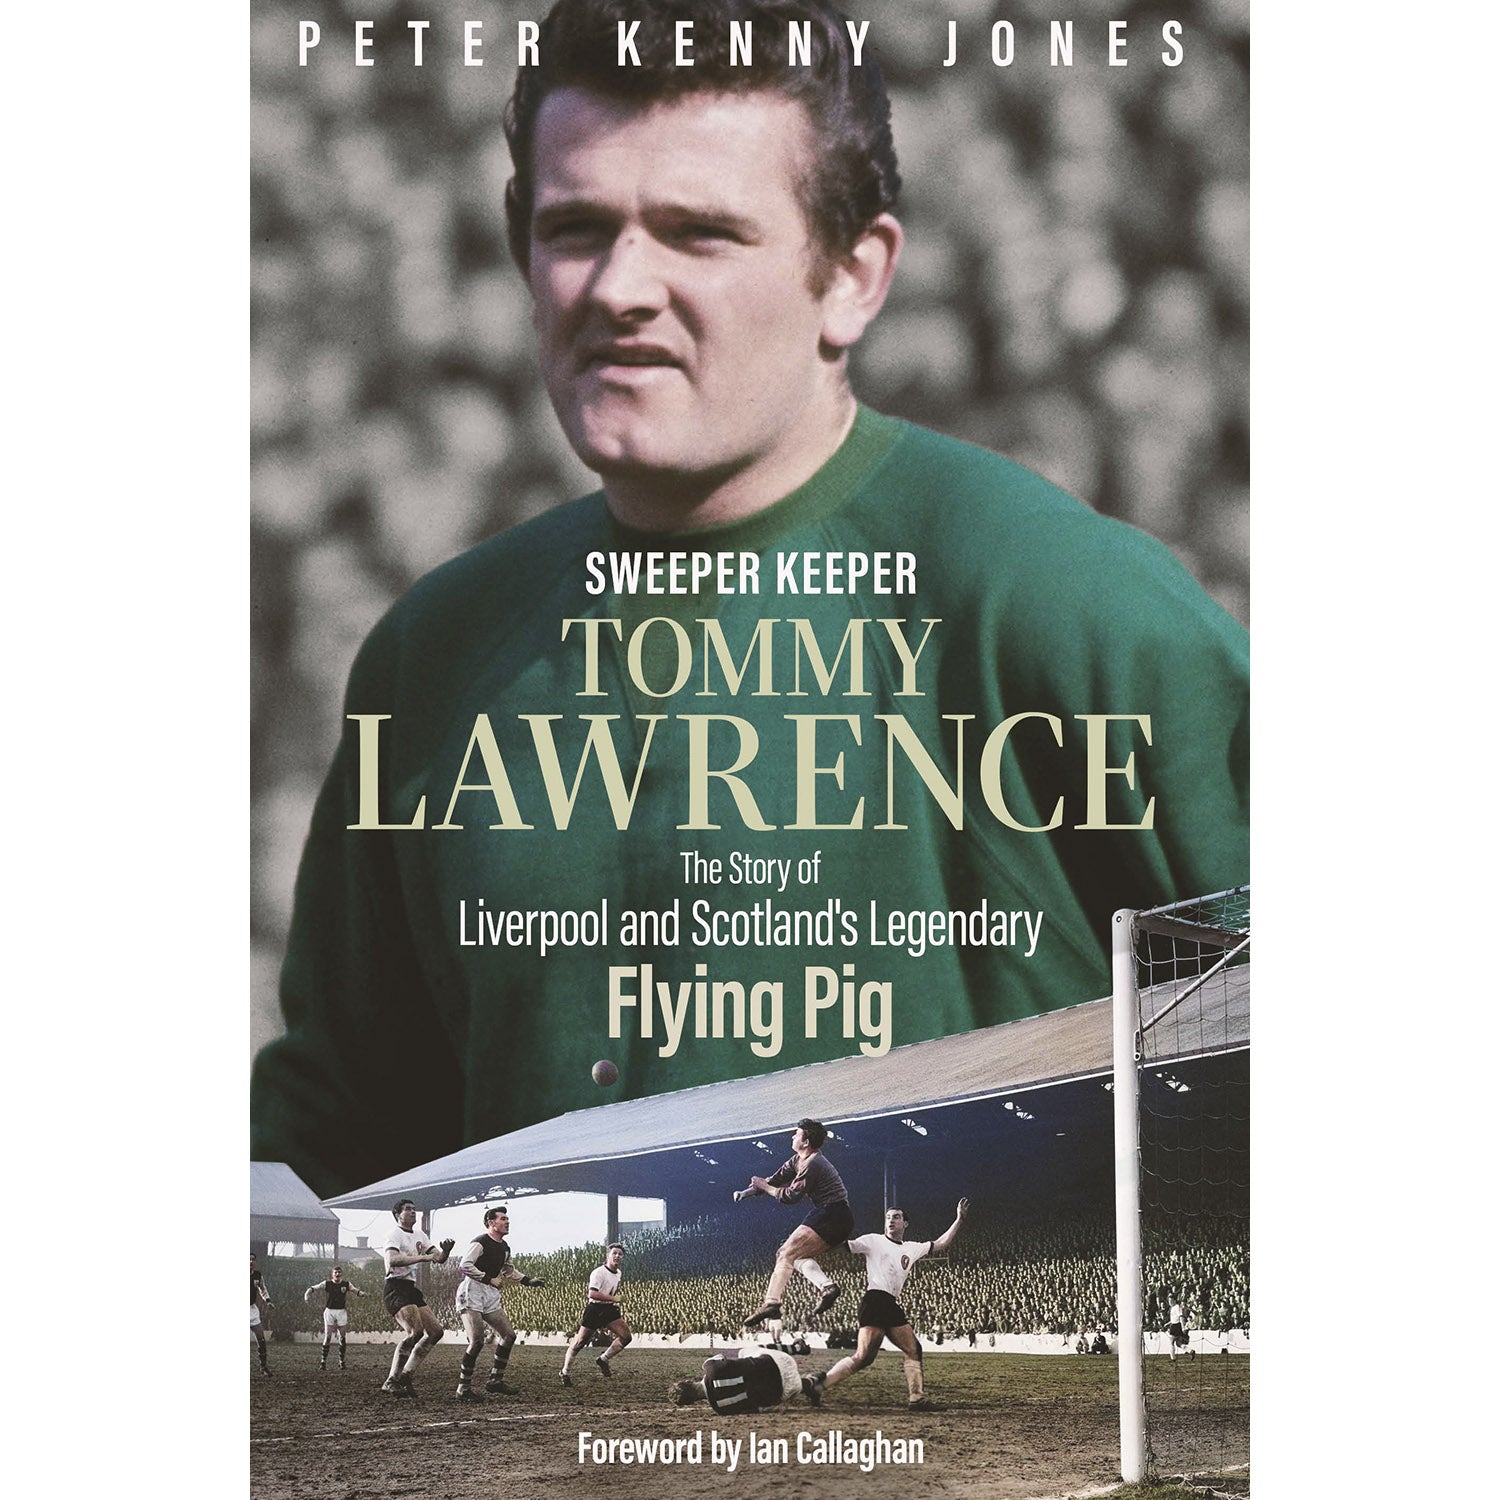 Sweeper Keeper – Tommy Lawrence – The Story of Liverpool and Scotland's Legendary Flying Pig